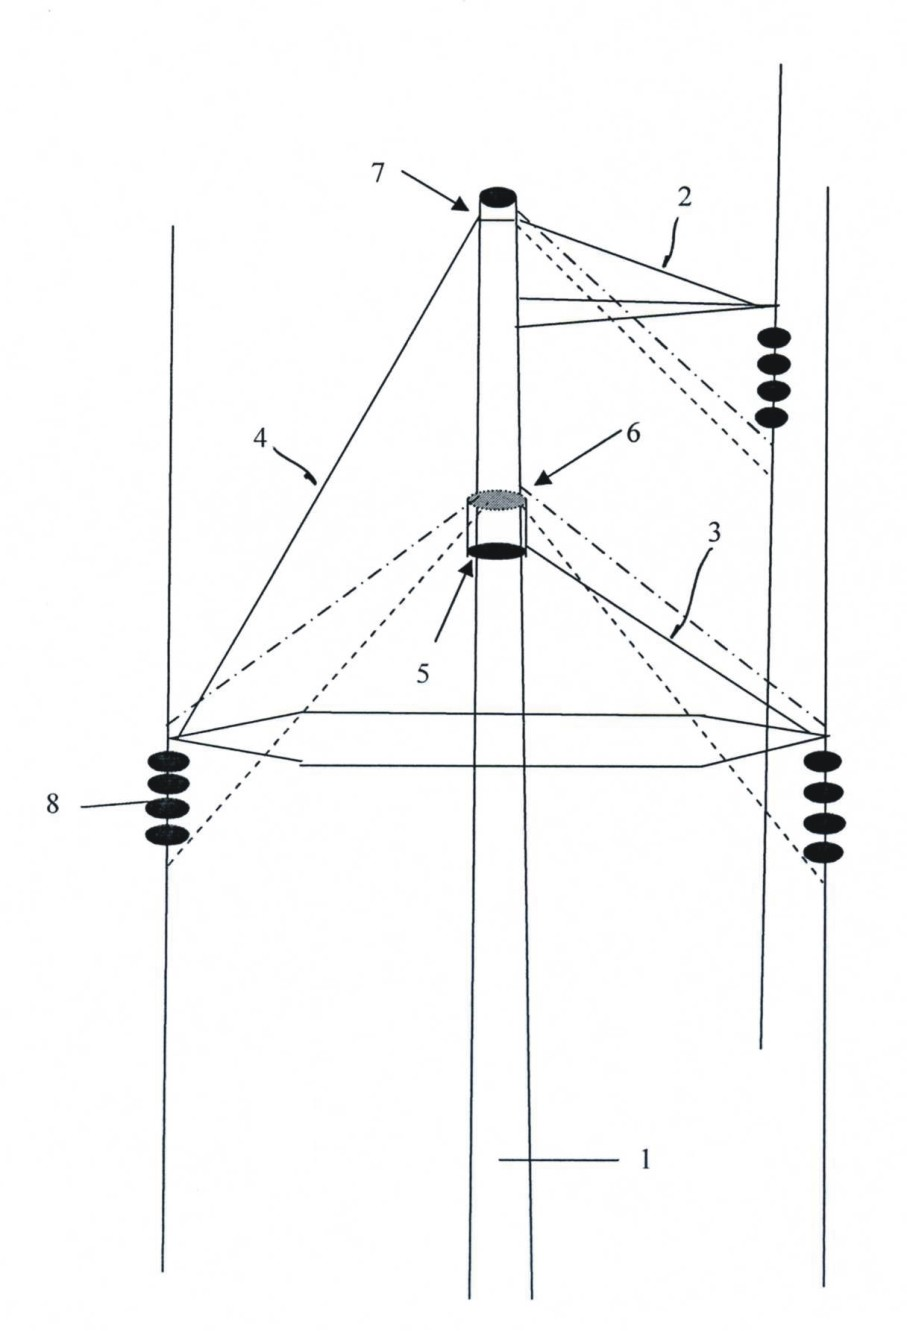 Construction method for replacing cross arm of 35kV line linear rod